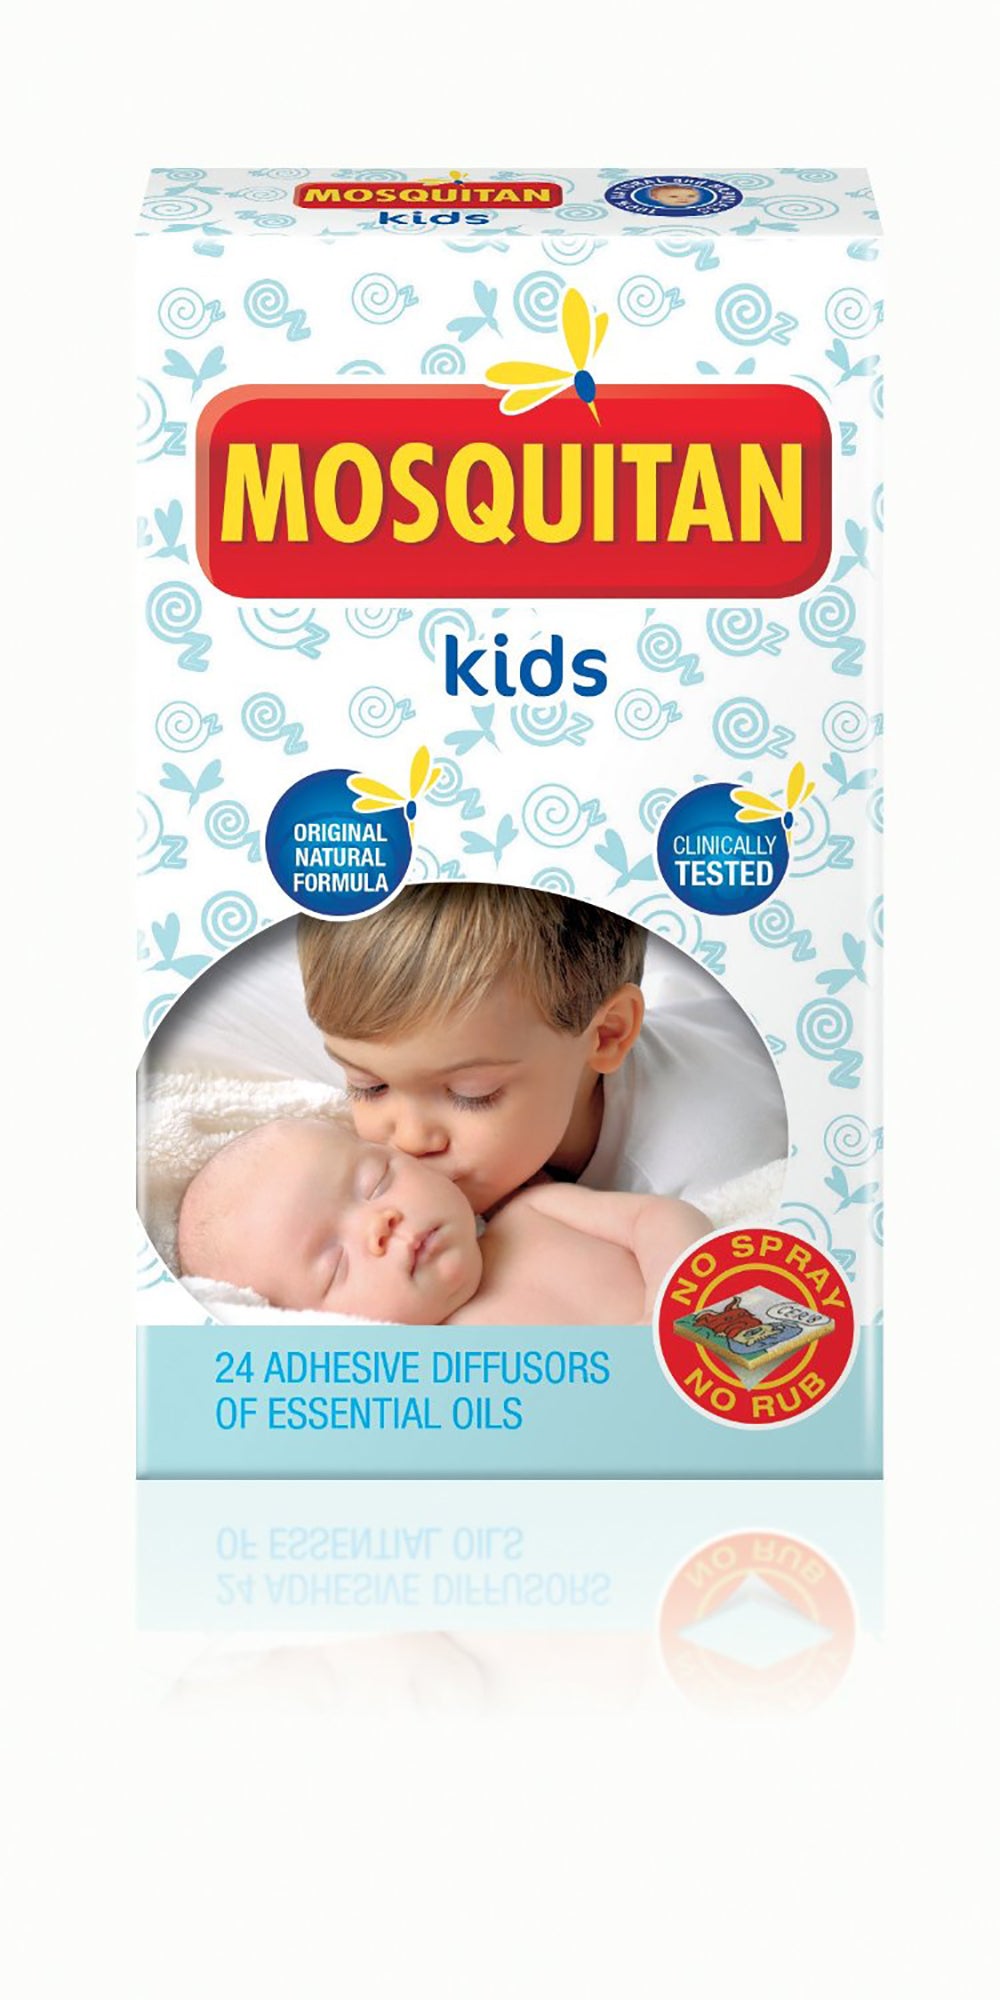 Mosquito Patches Deet Free Perfect For Kids. (24 PATCHES)